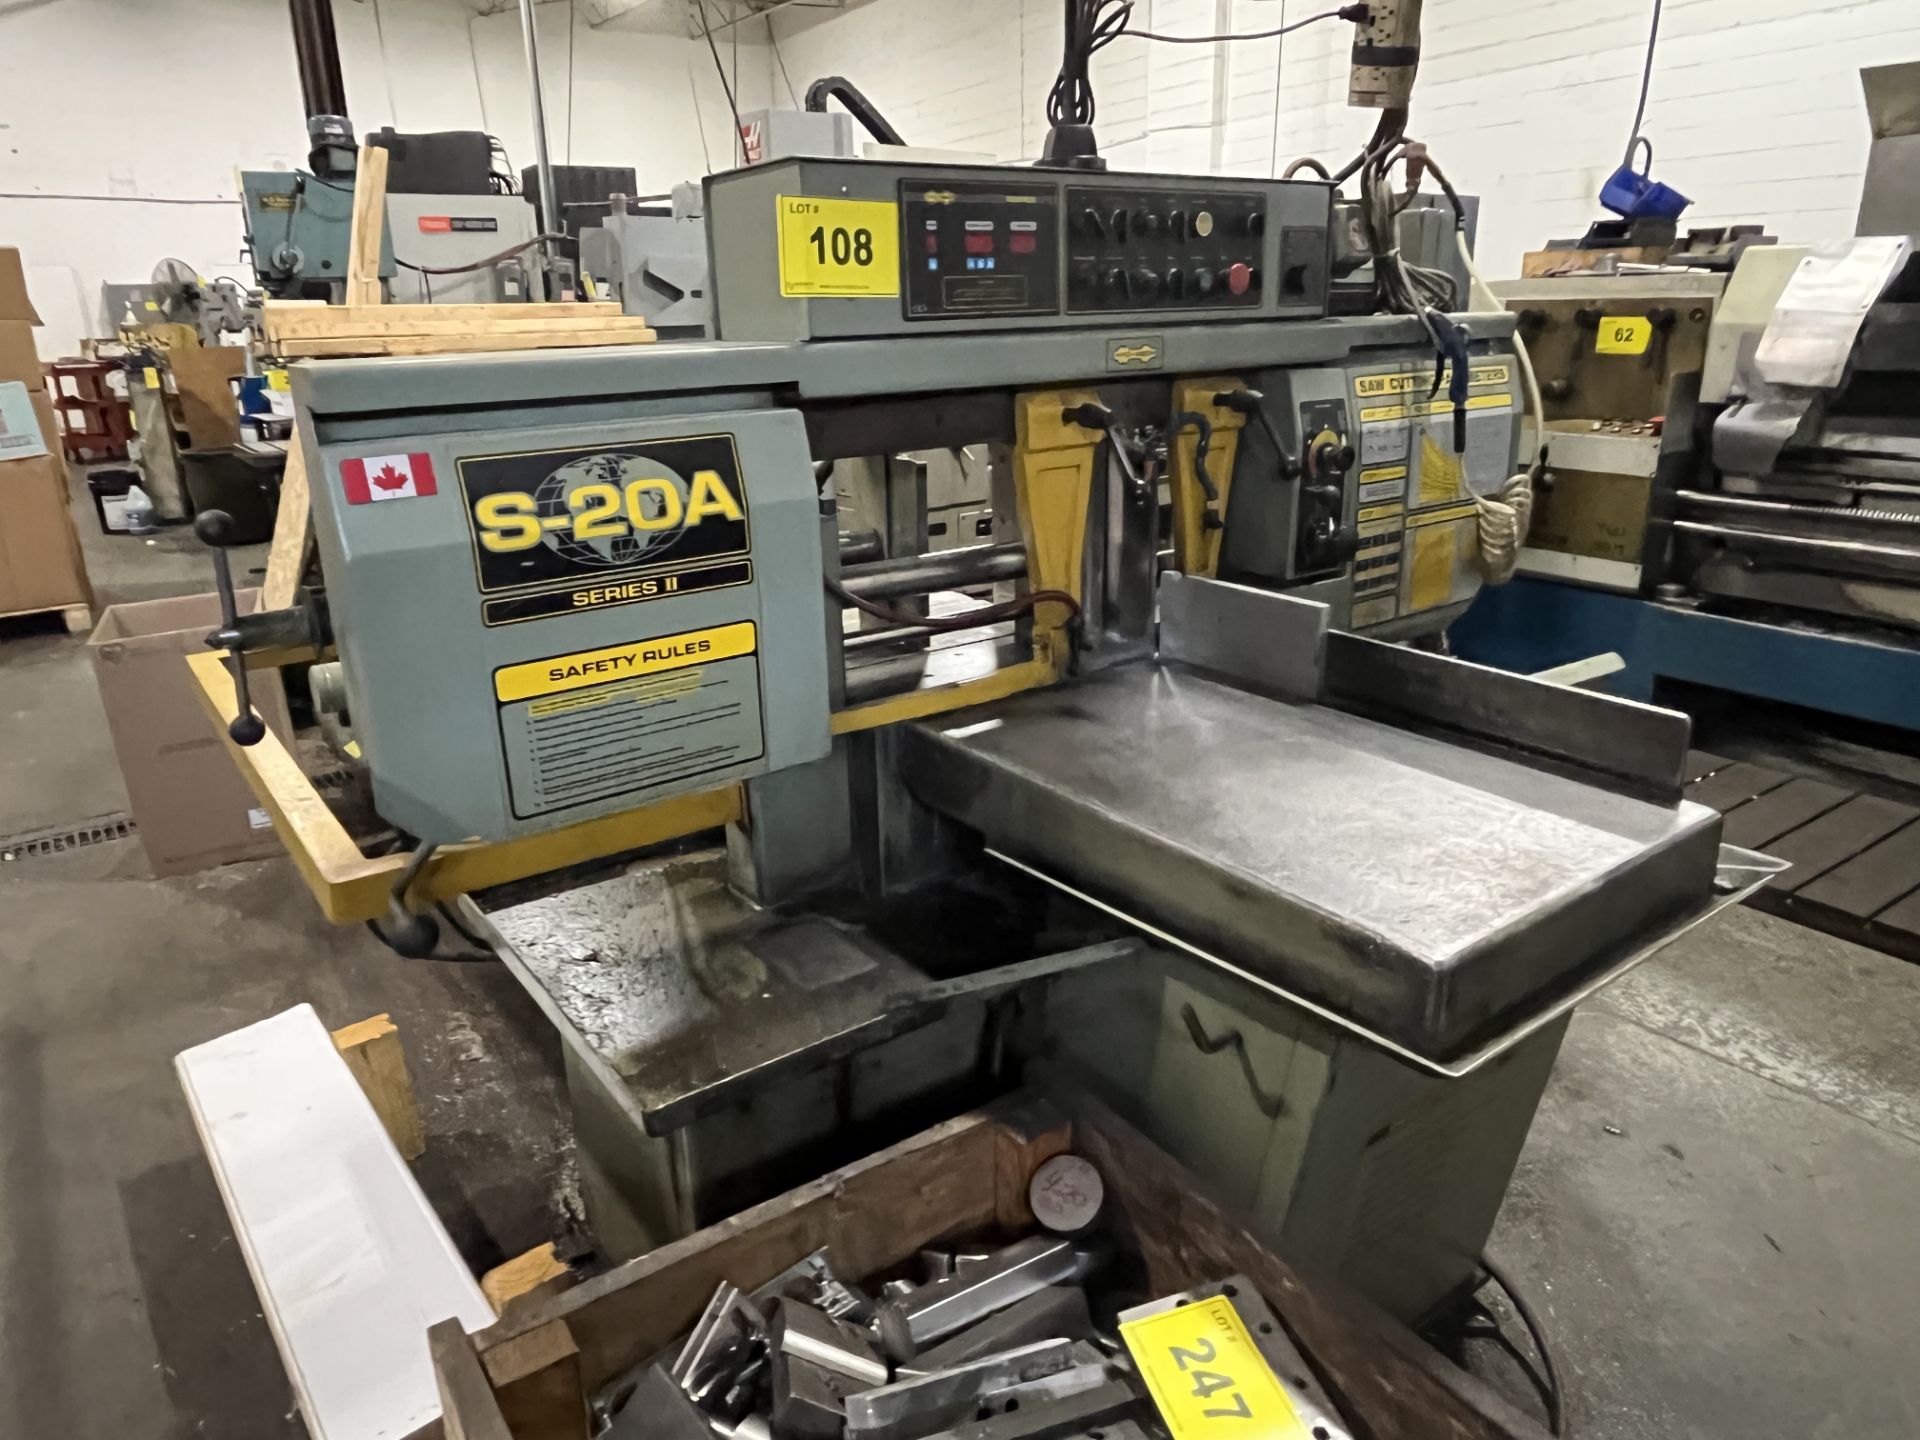 HYD-MECH S-20A SERIES II AUTOMATIC HORIZONTAL BANDSAW, S/N 80298380 W/ CONVEYOR (RIGGING FEE $825) - Image 11 of 11